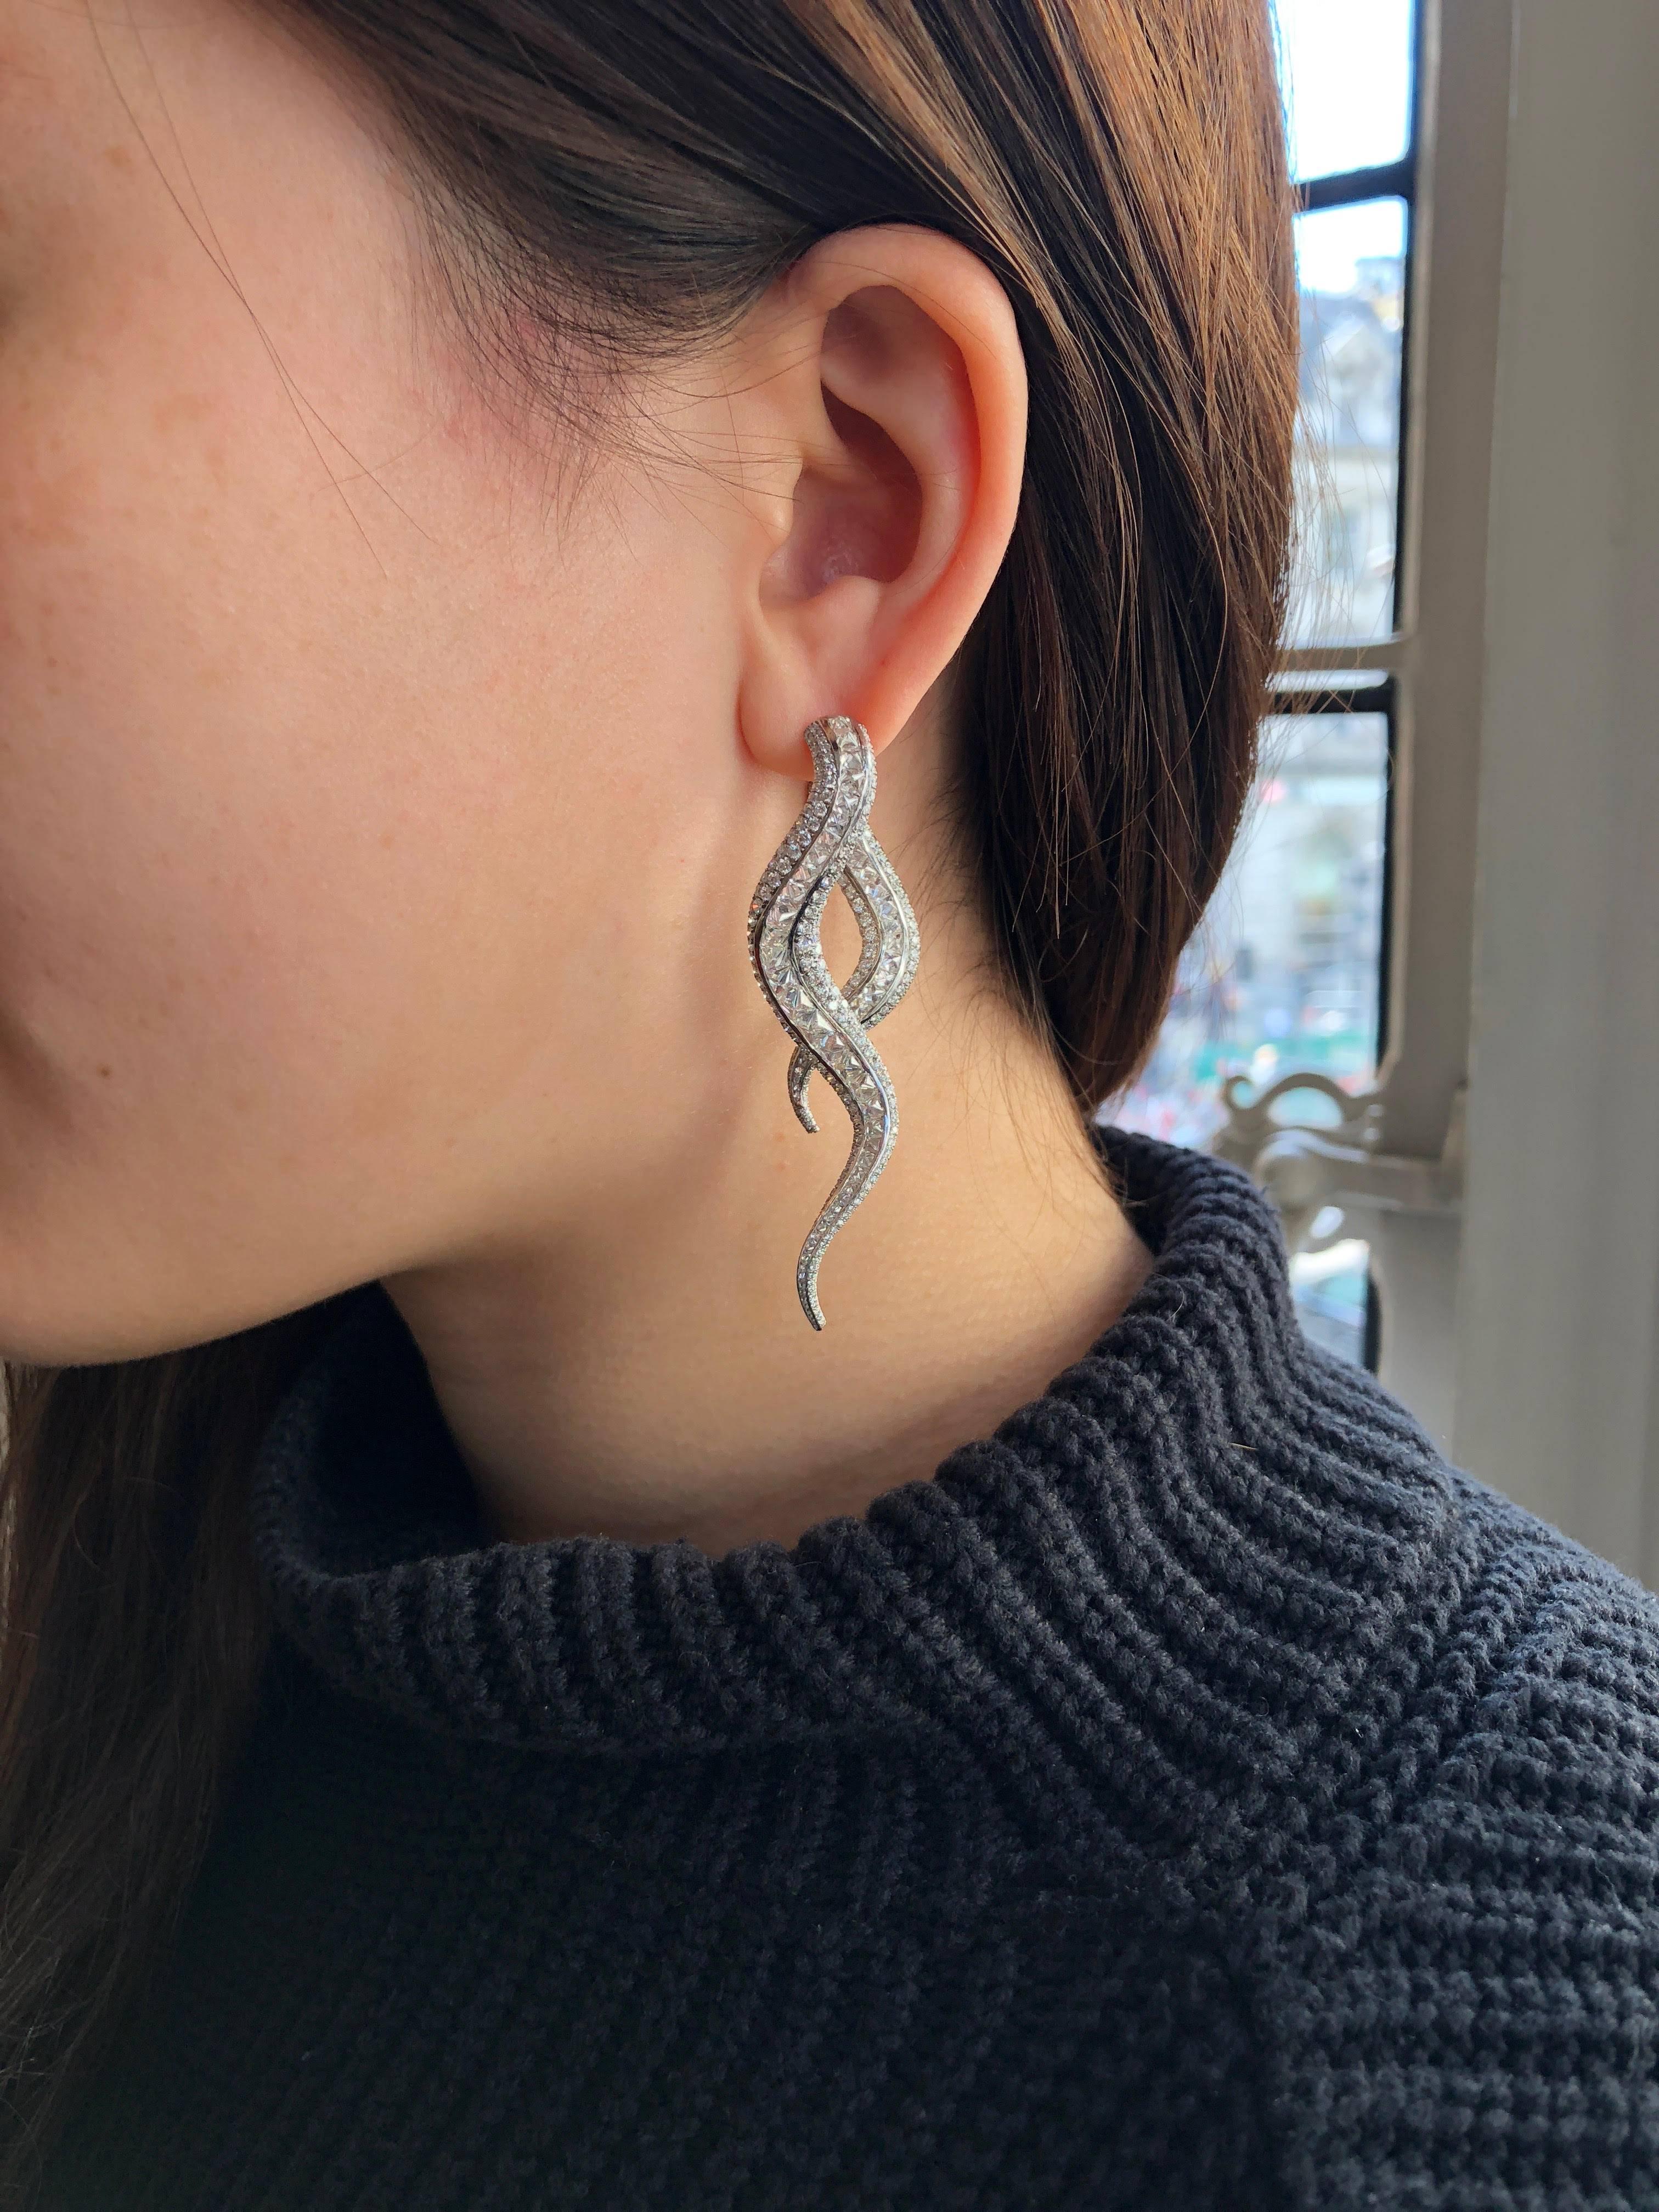 A pair of platinum and diamond snake earrings by Morelle Davidson, each earring designed as a pair of snake tails enveloping the wearer from either side, each tail composed of twisting bands pavé-set alternately with rose-cut or reverse-set